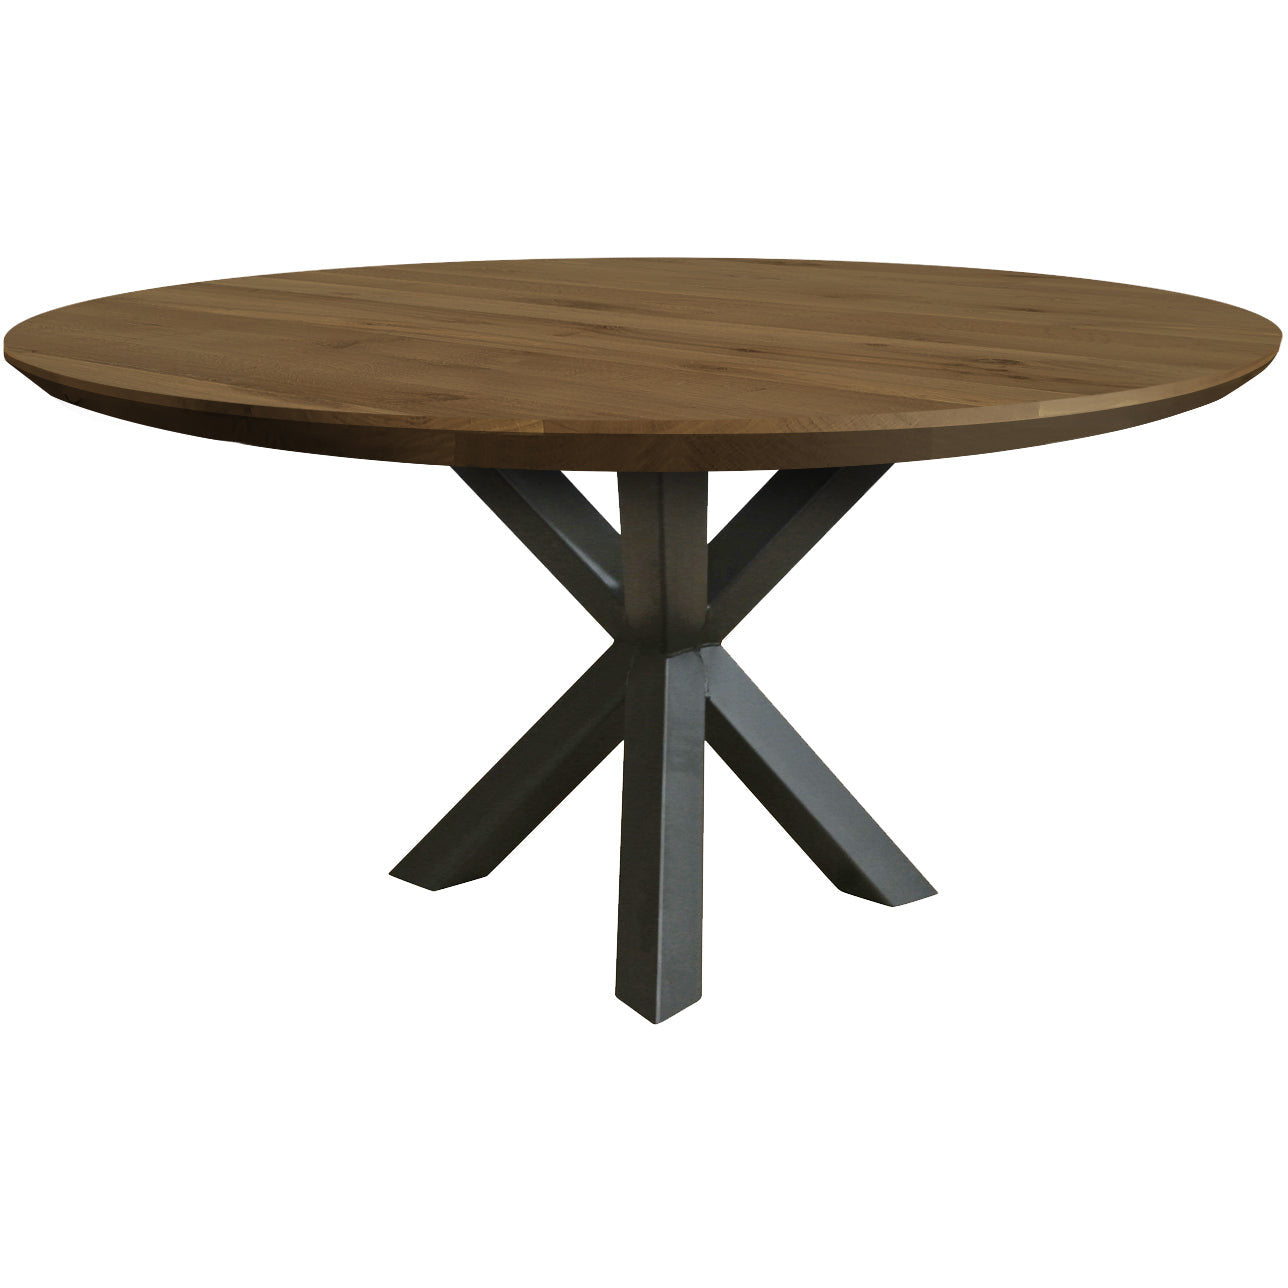 Dining table | Round | Warm brown | Oak wood | Lacquered Spider Leg |